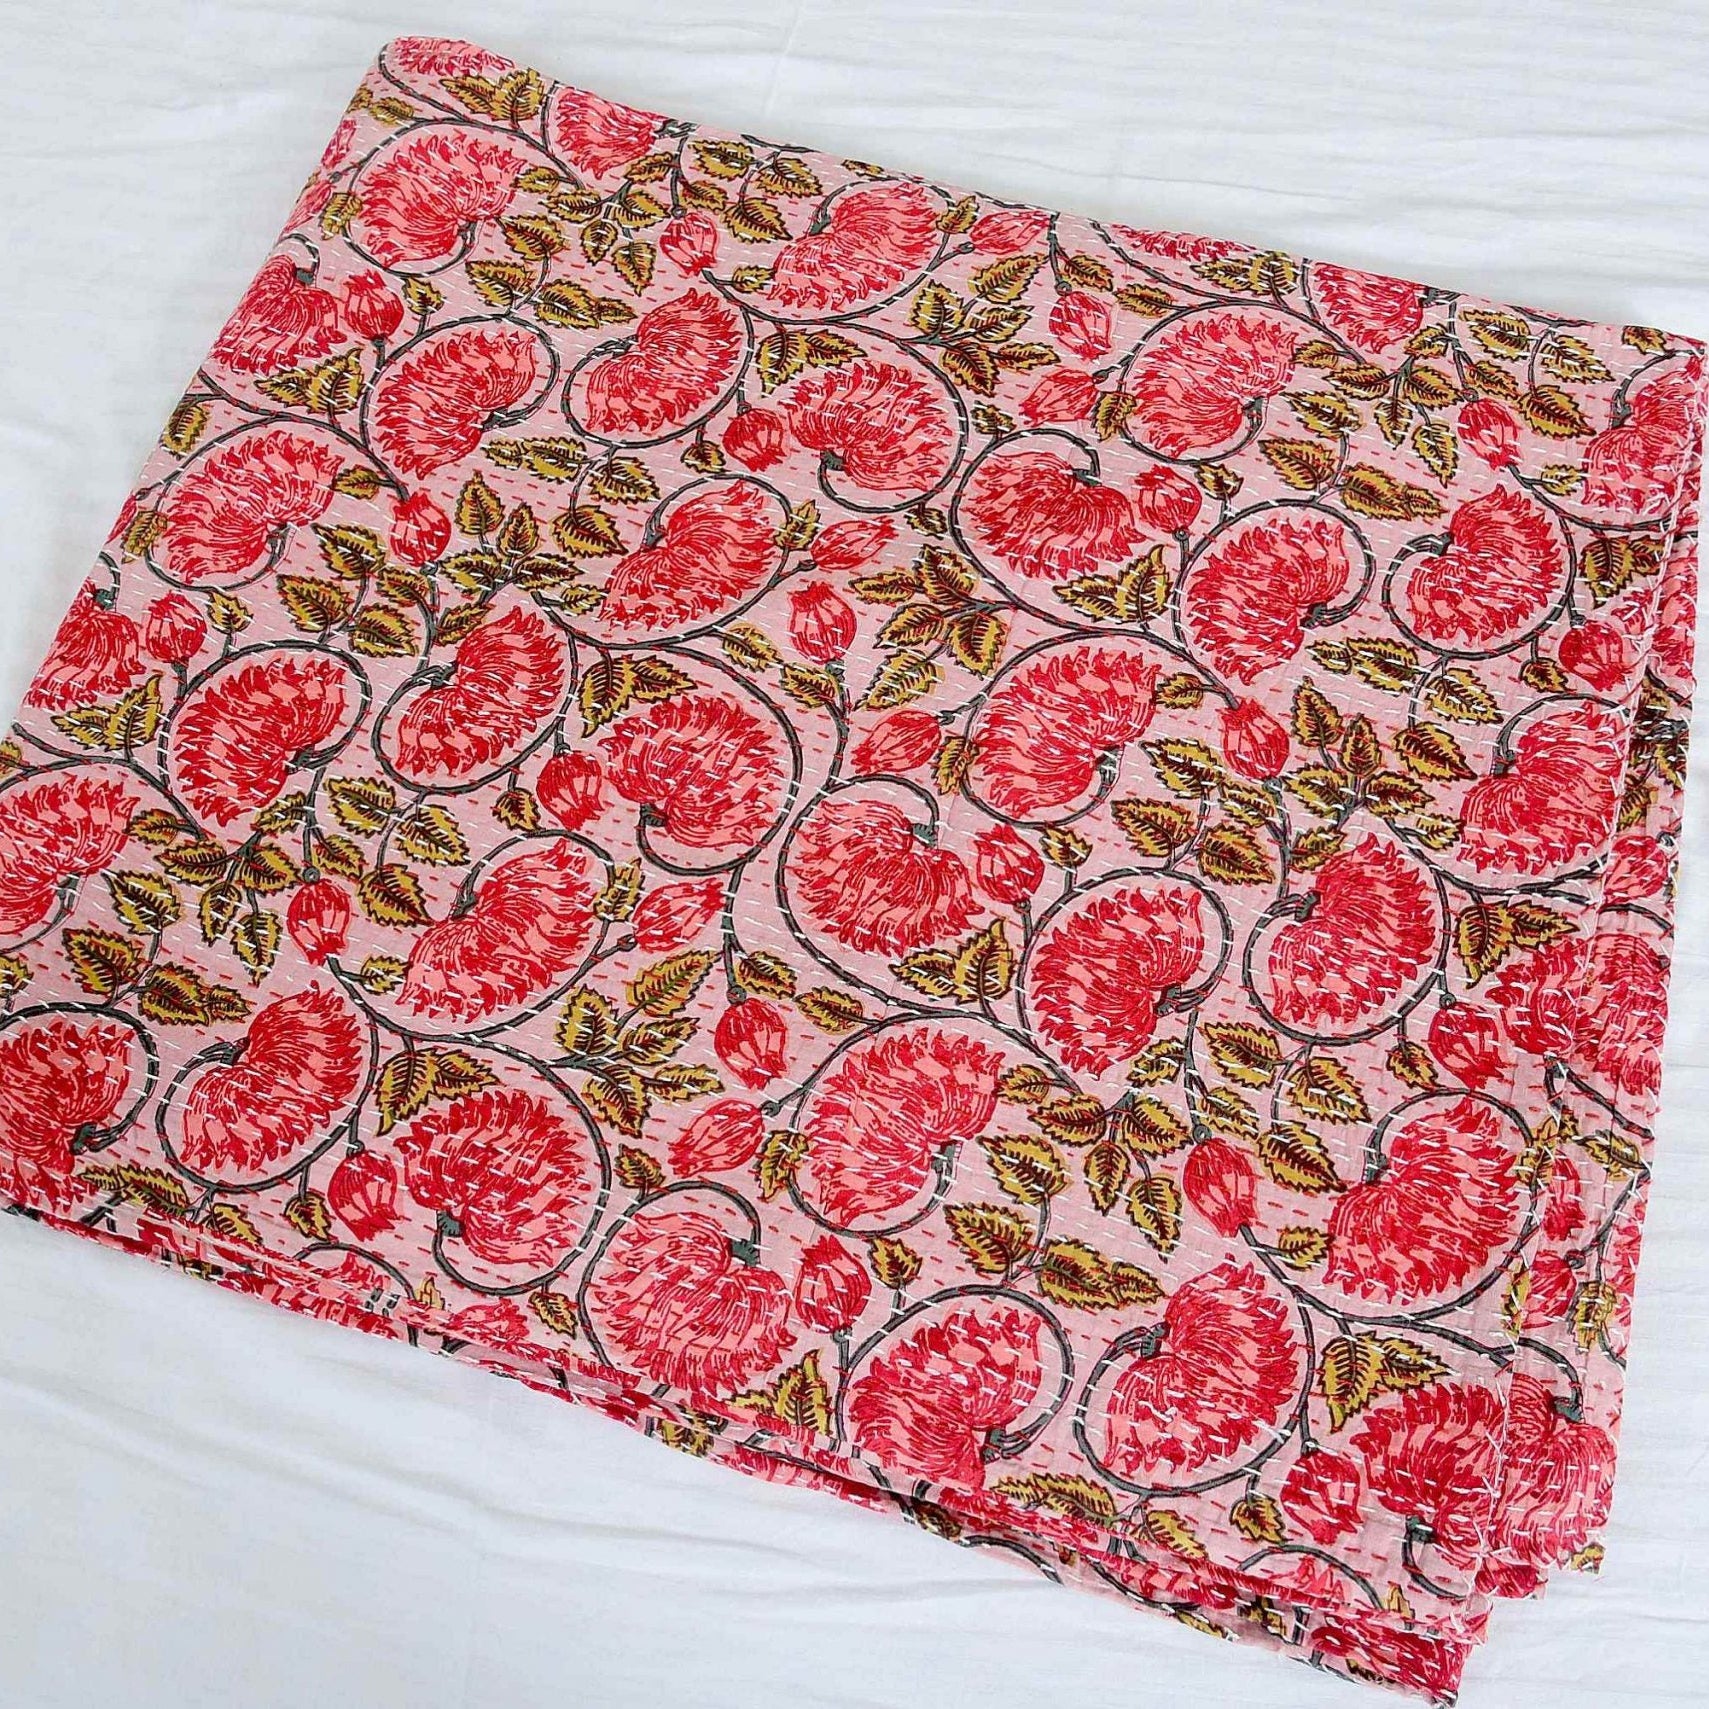 Linen Connections Handmade Indian Kantha Quilt Blanket - Red Chic